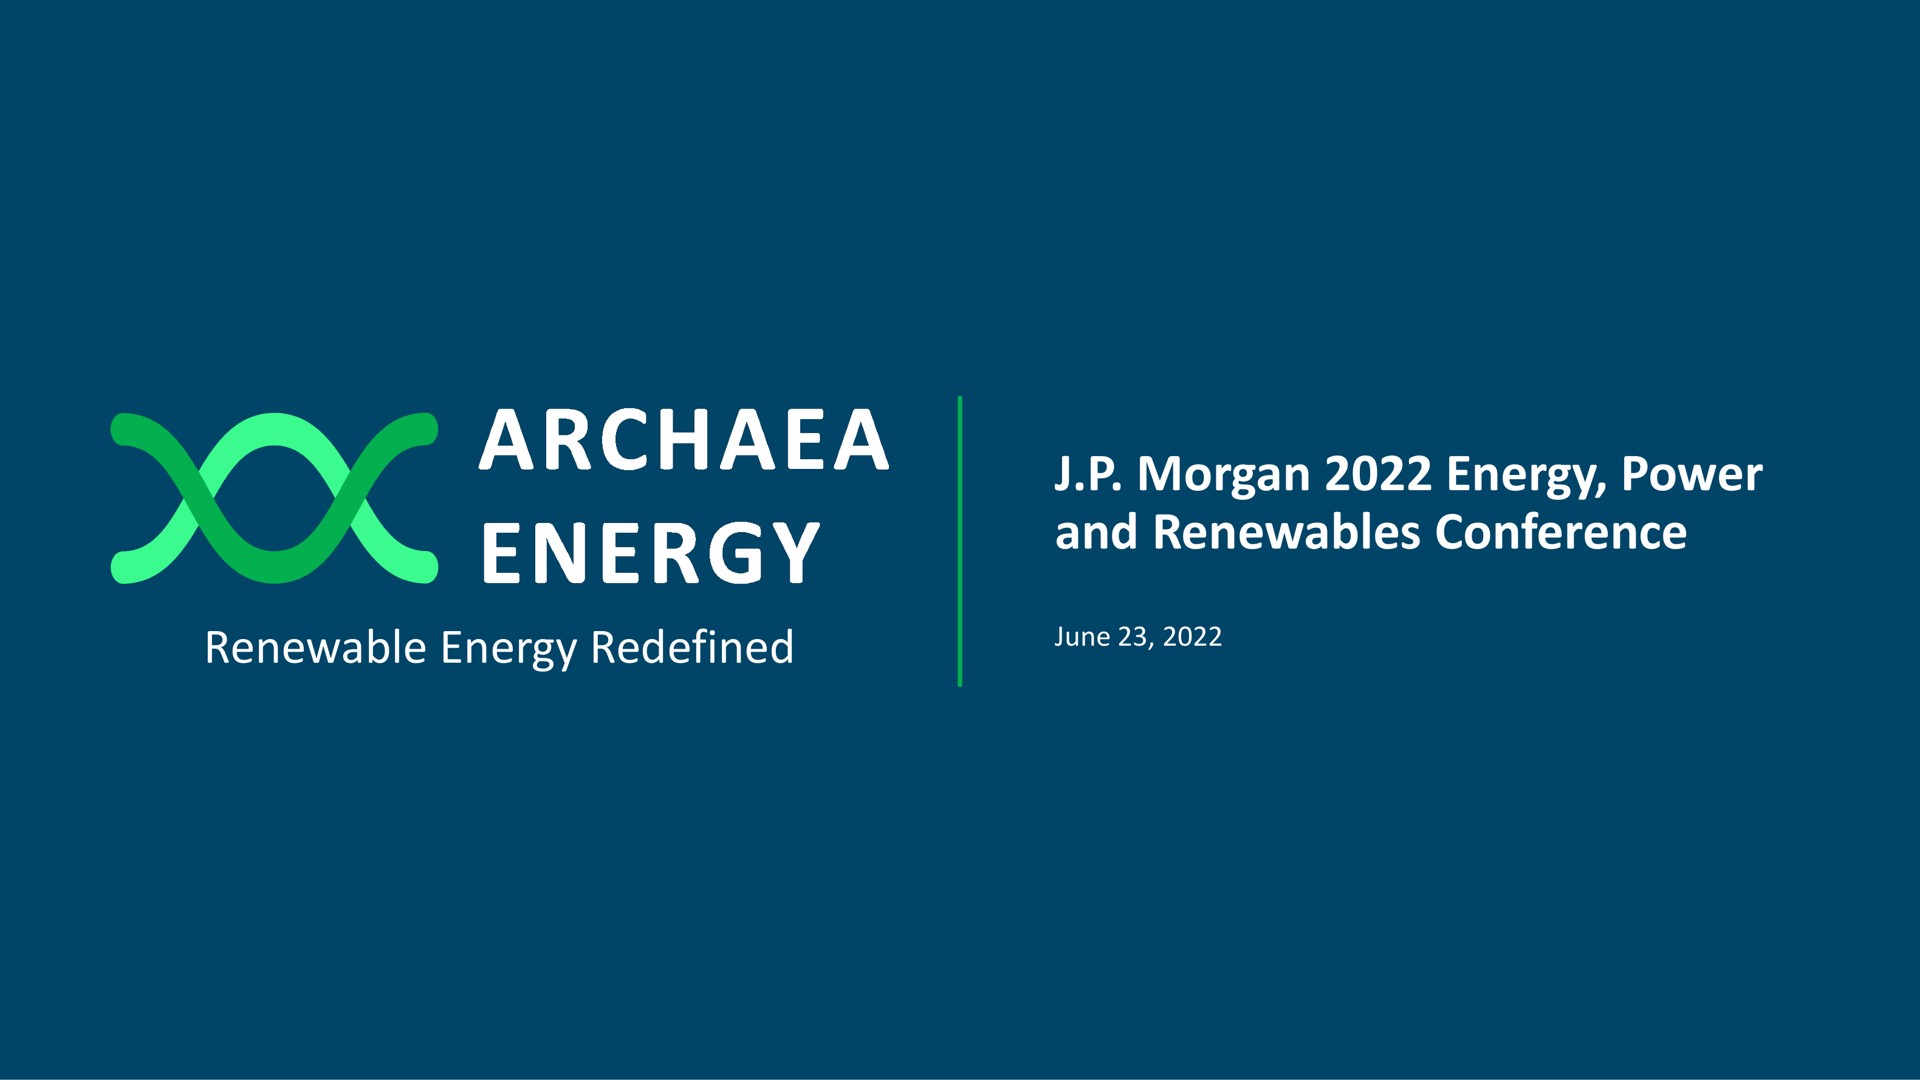 renewable energy redefined morgan energy power and conference a a | Archaea Energy